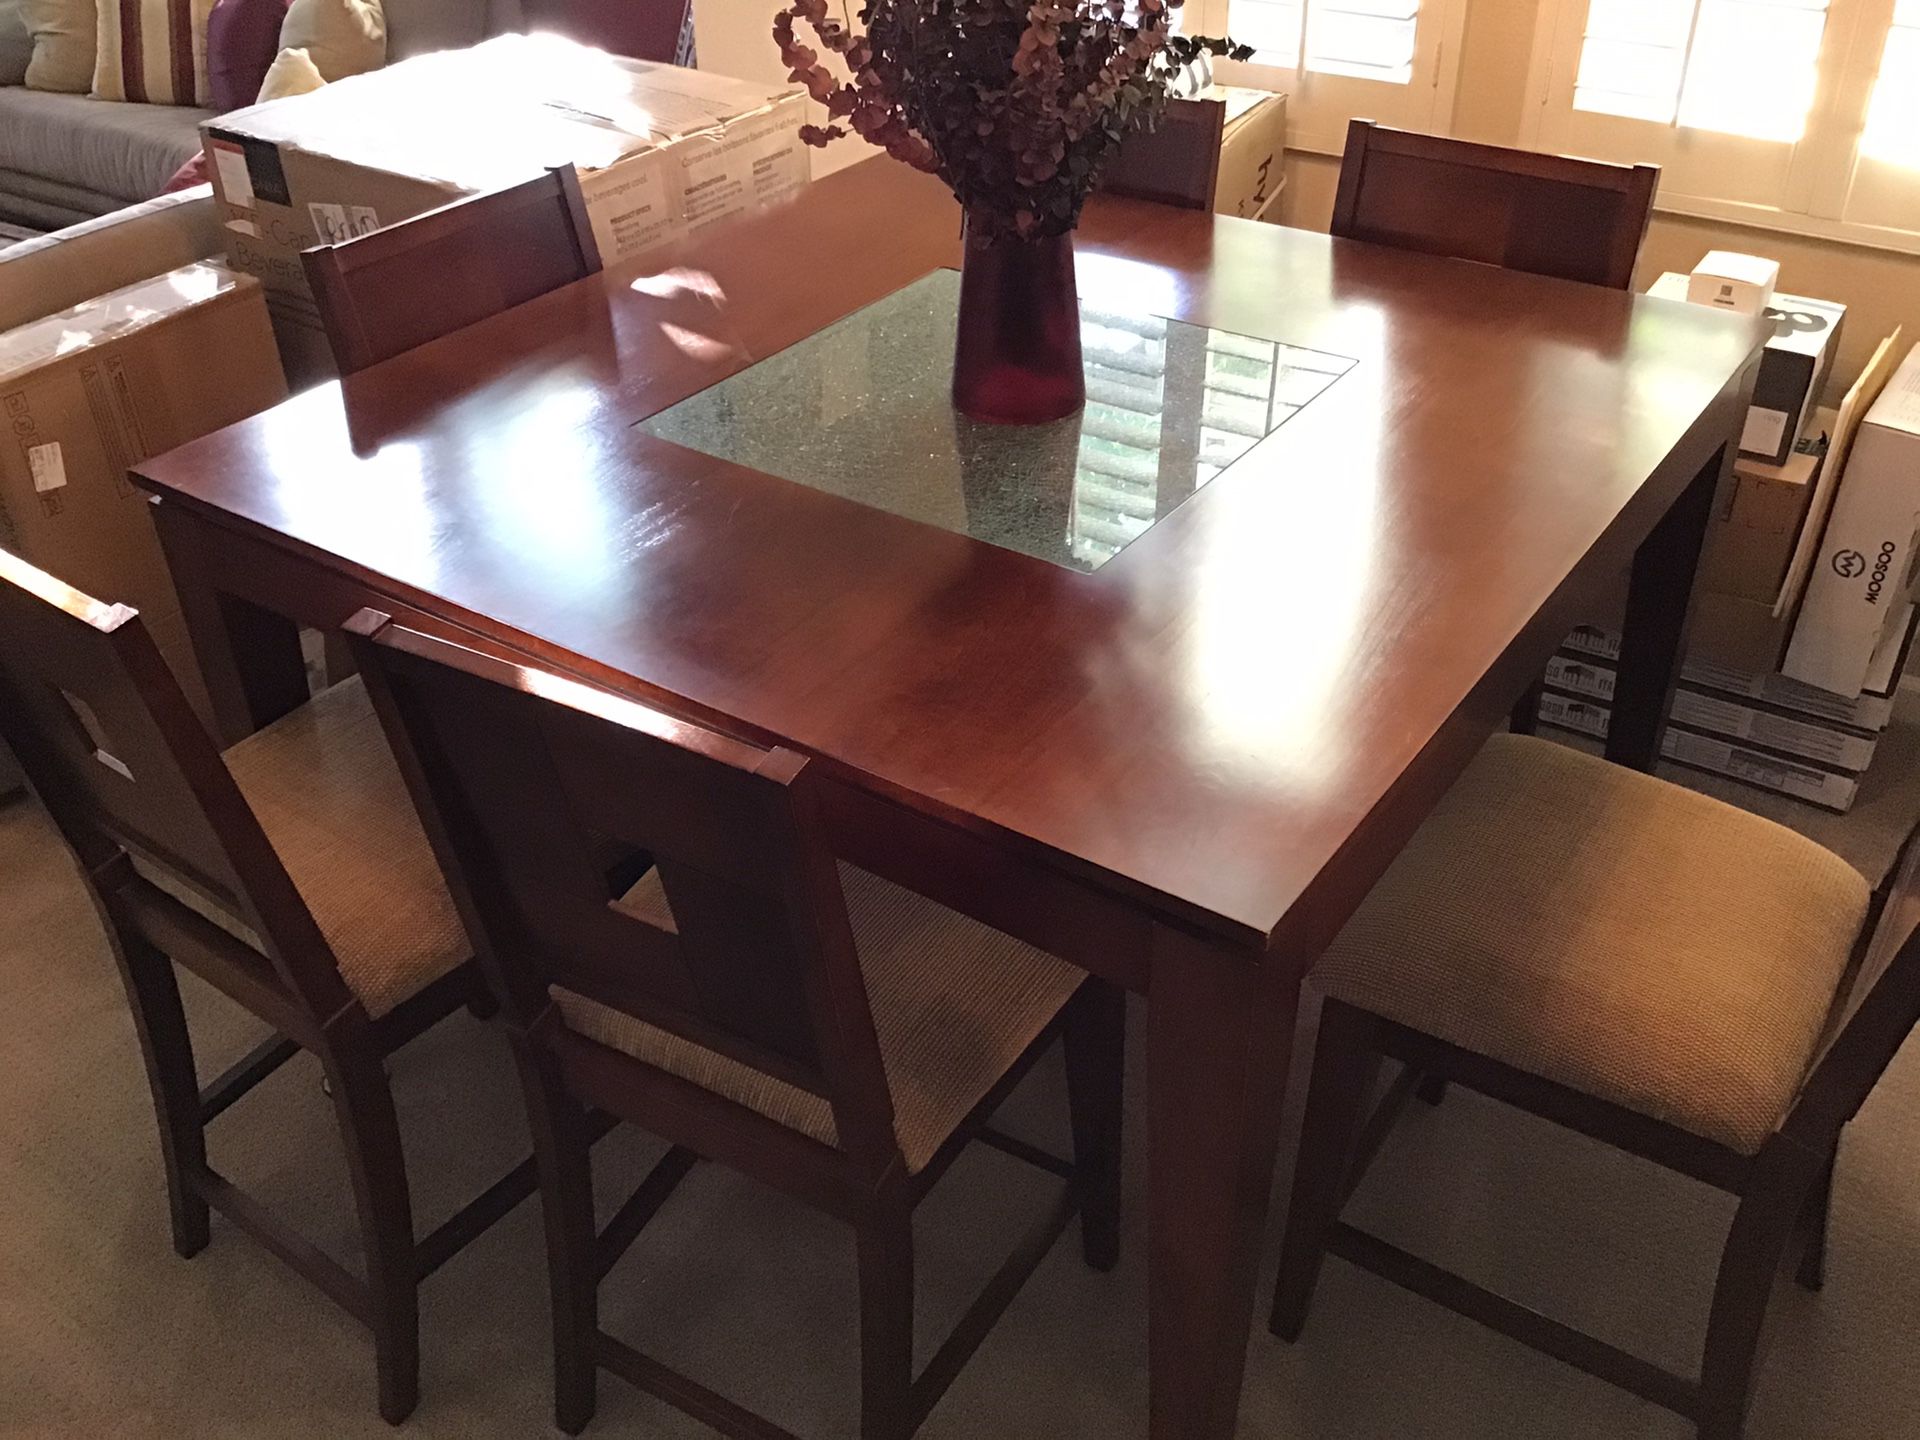 Kitchen table with 8 chairs